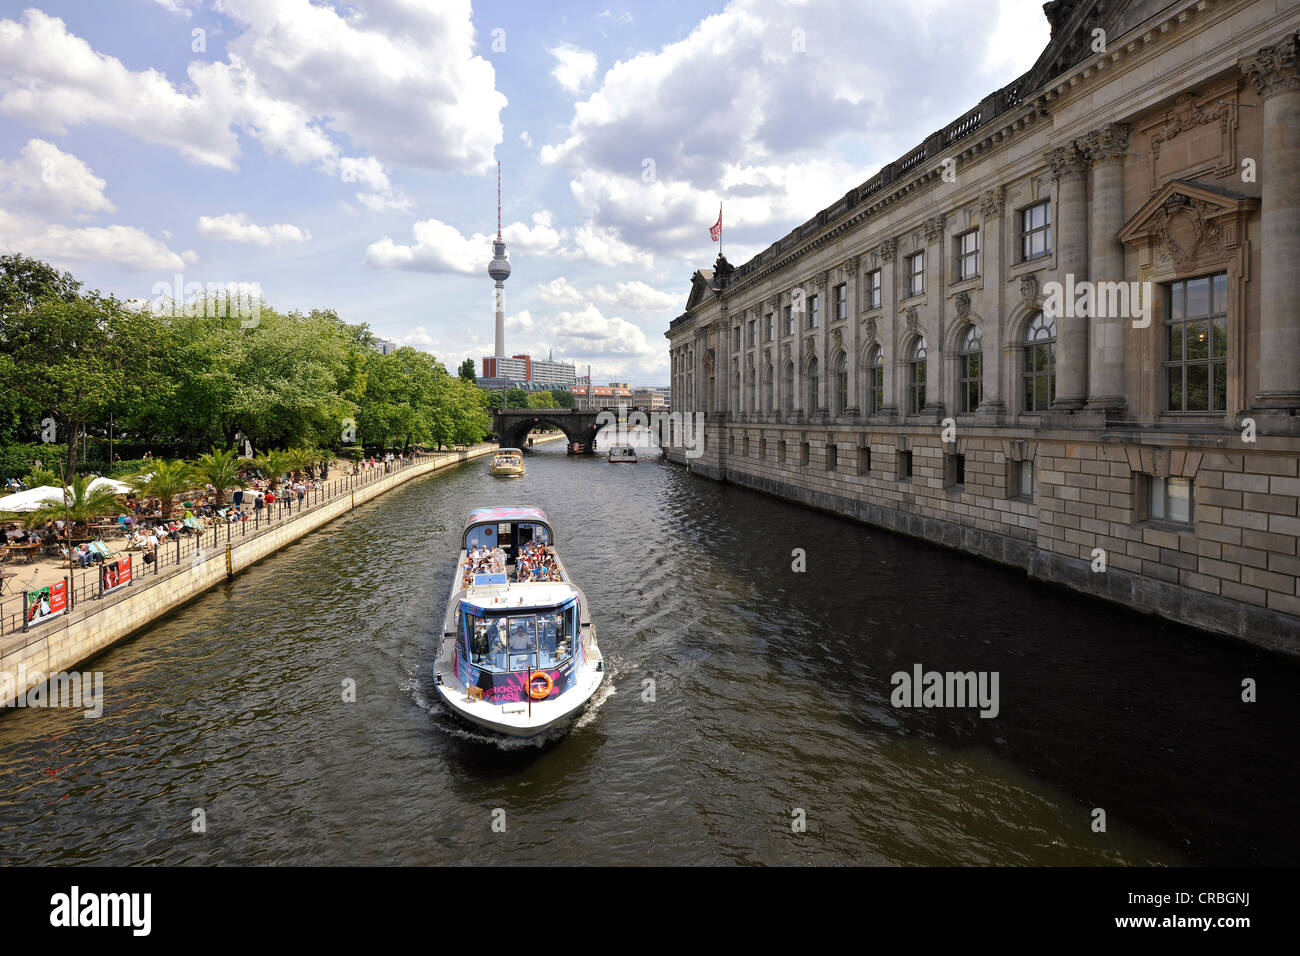 Bode-Museum, TV tower, excursion boats with tourists, Museumsinsel island, UNESCO World Heritage Site, Mitte district, Berlin Stock Photo